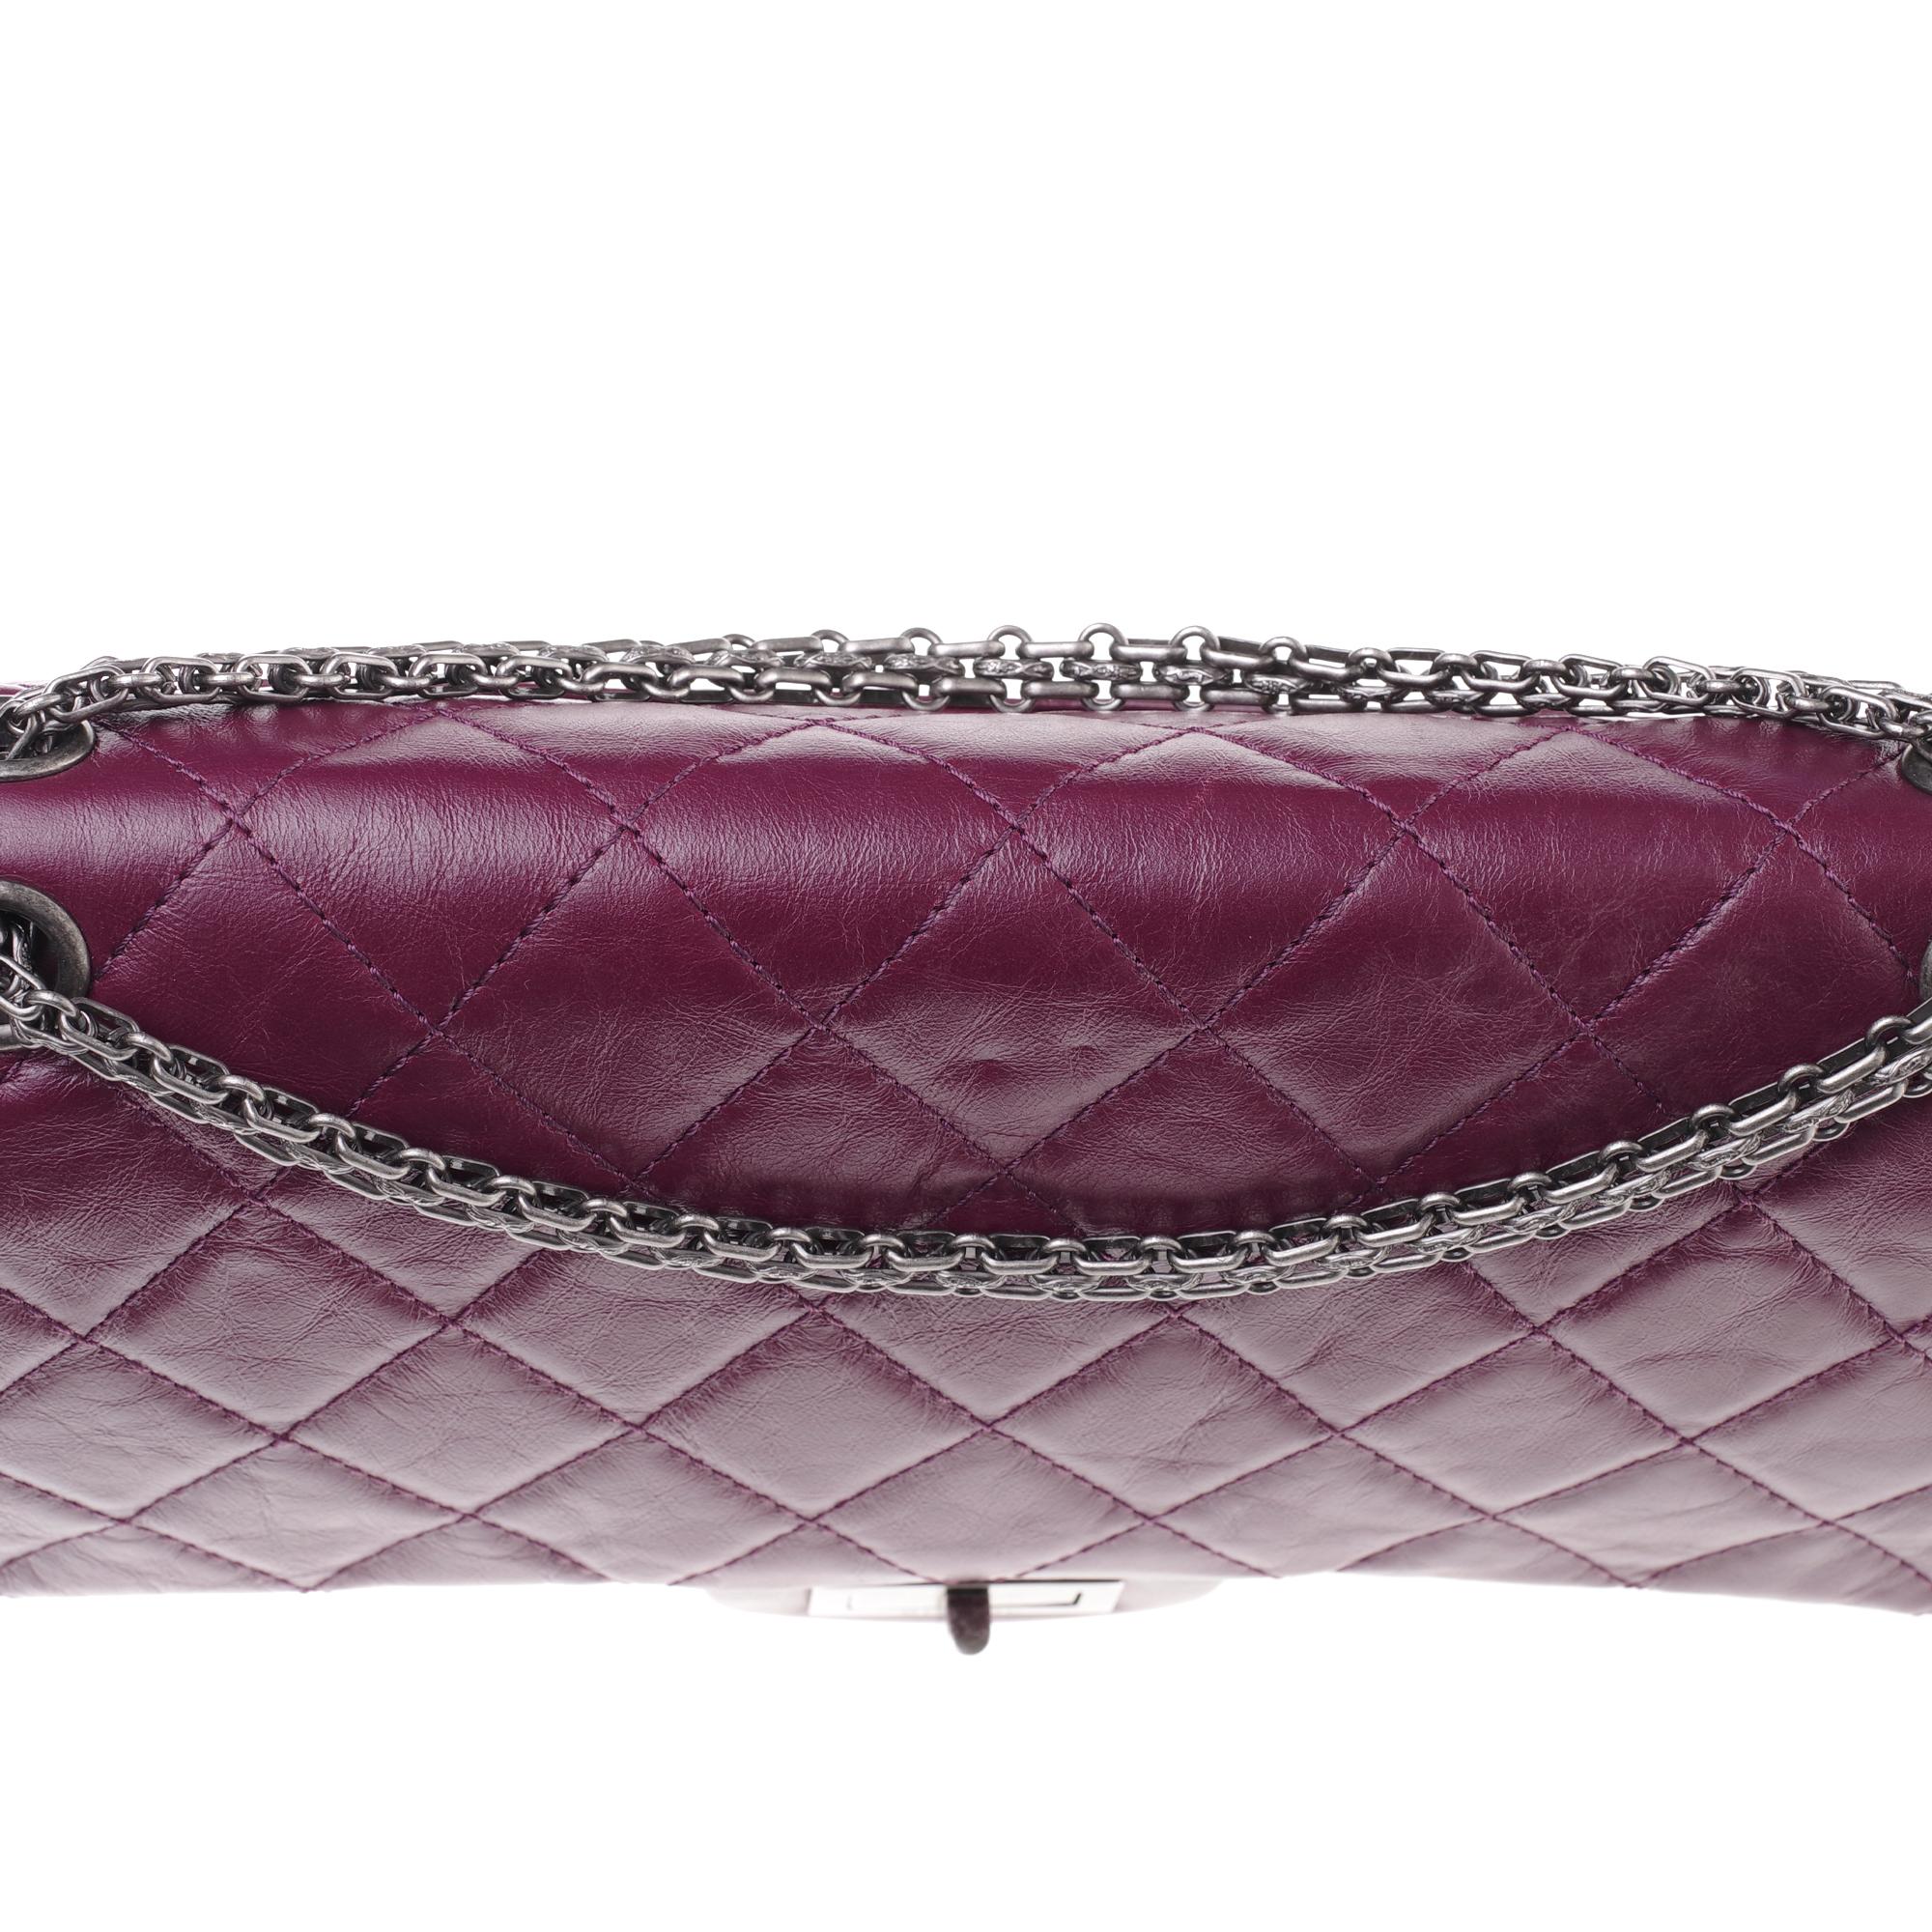 Amazing Chanel 2.55 Reissue handbag in plum quilted leather 5